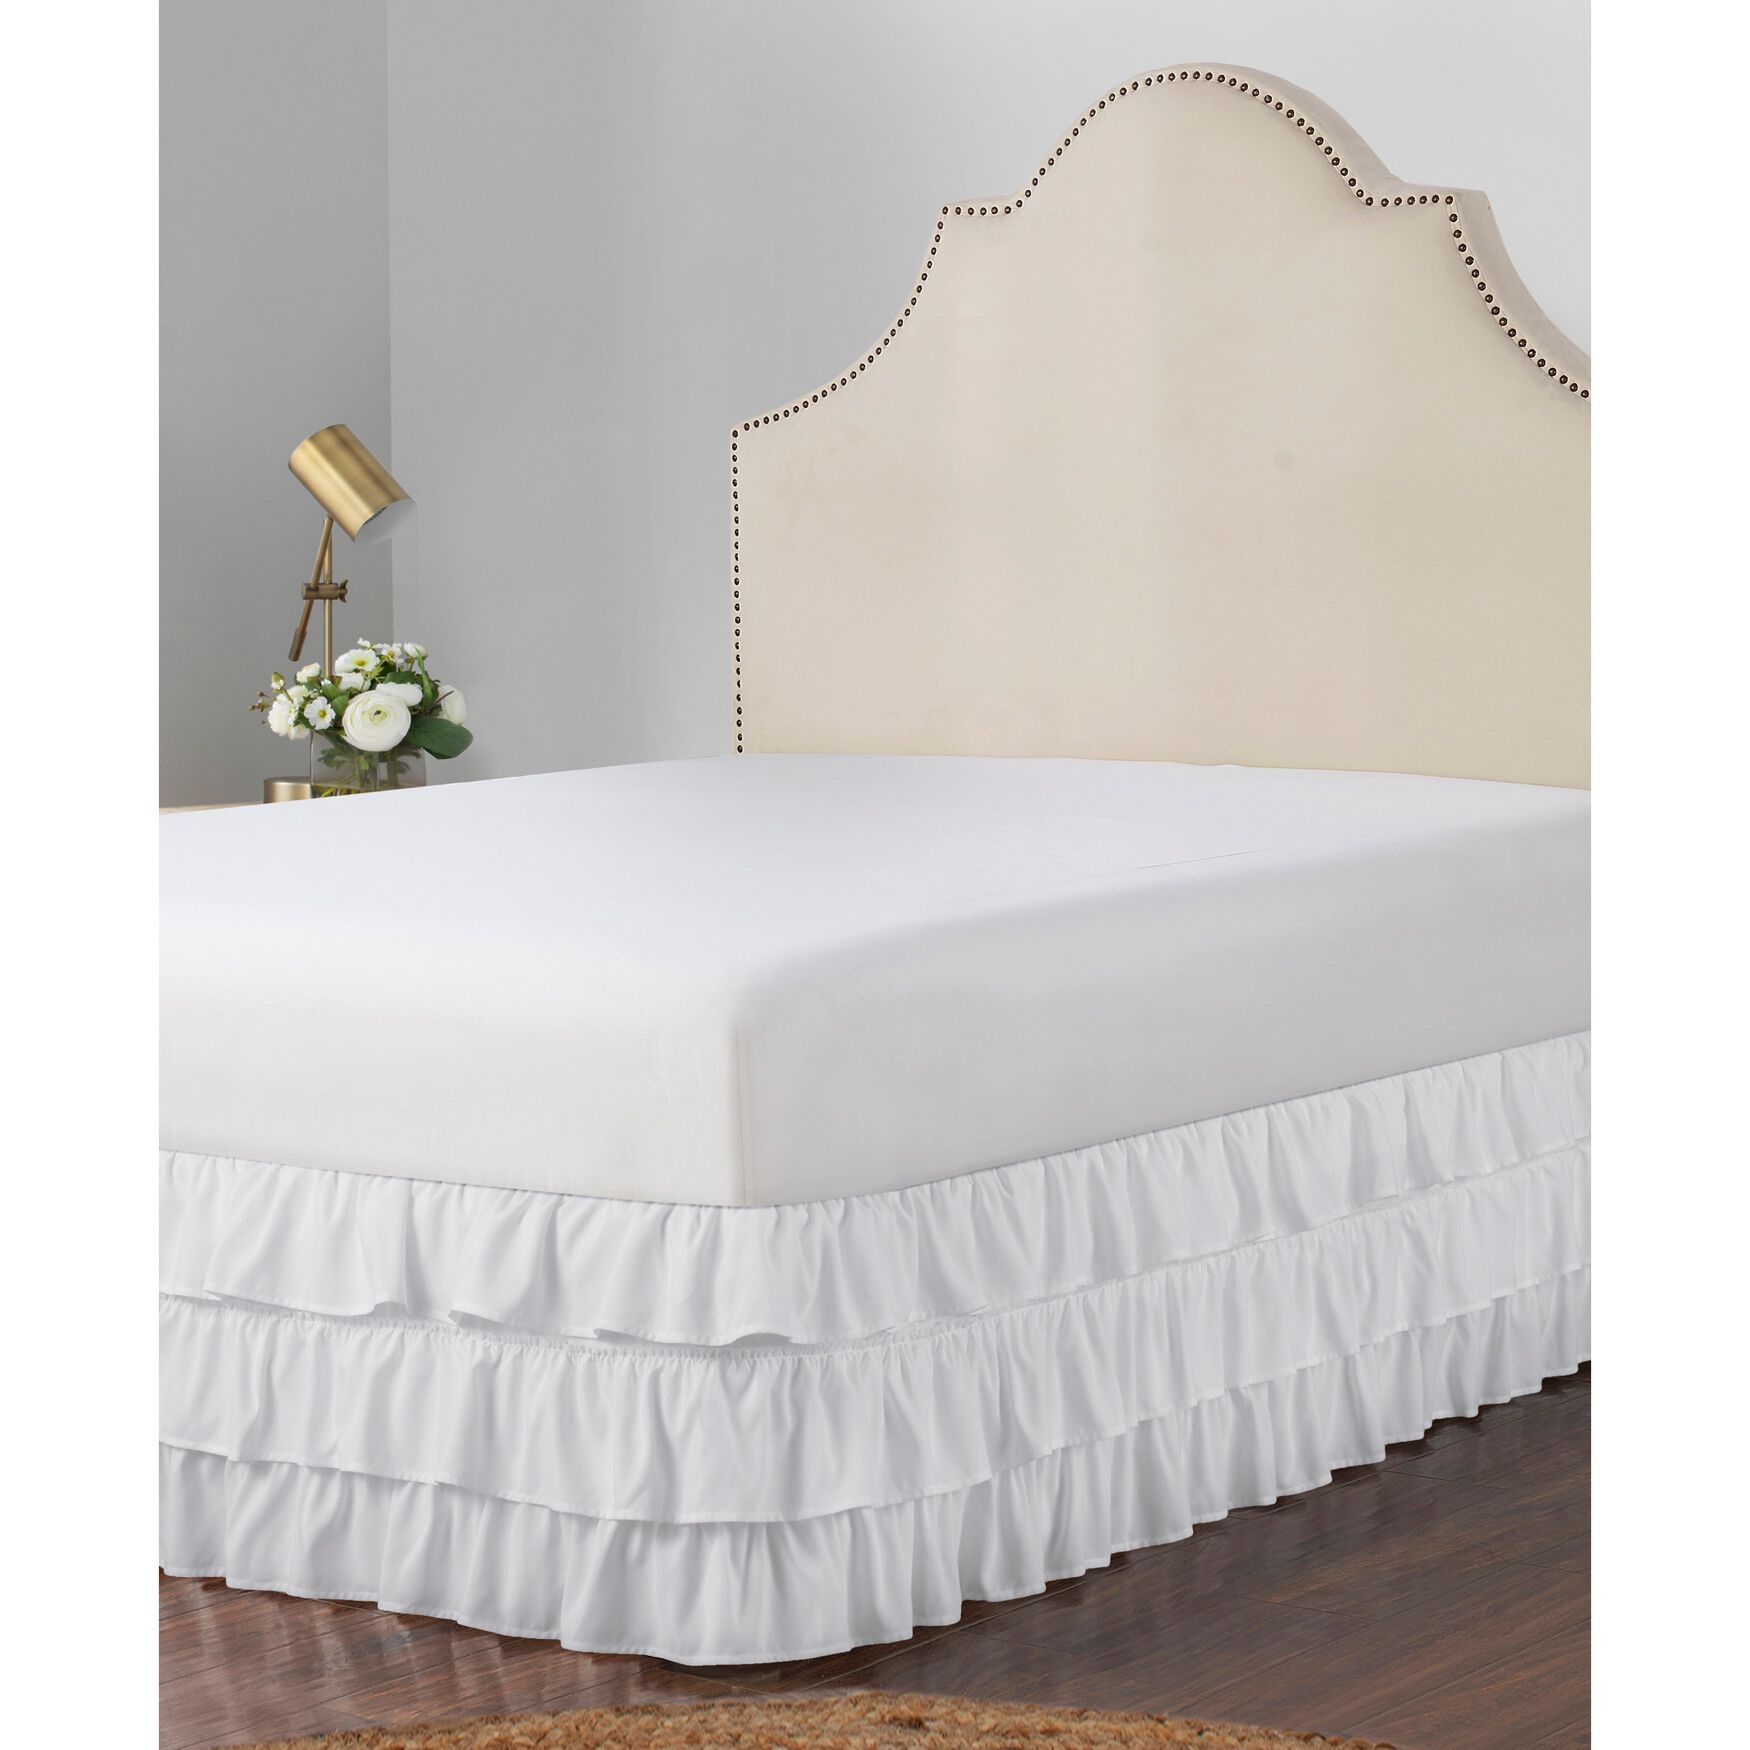 Belles & Whistles King Size Tailored Bedskirt 78" x 80" Ivory Color New in Pack 